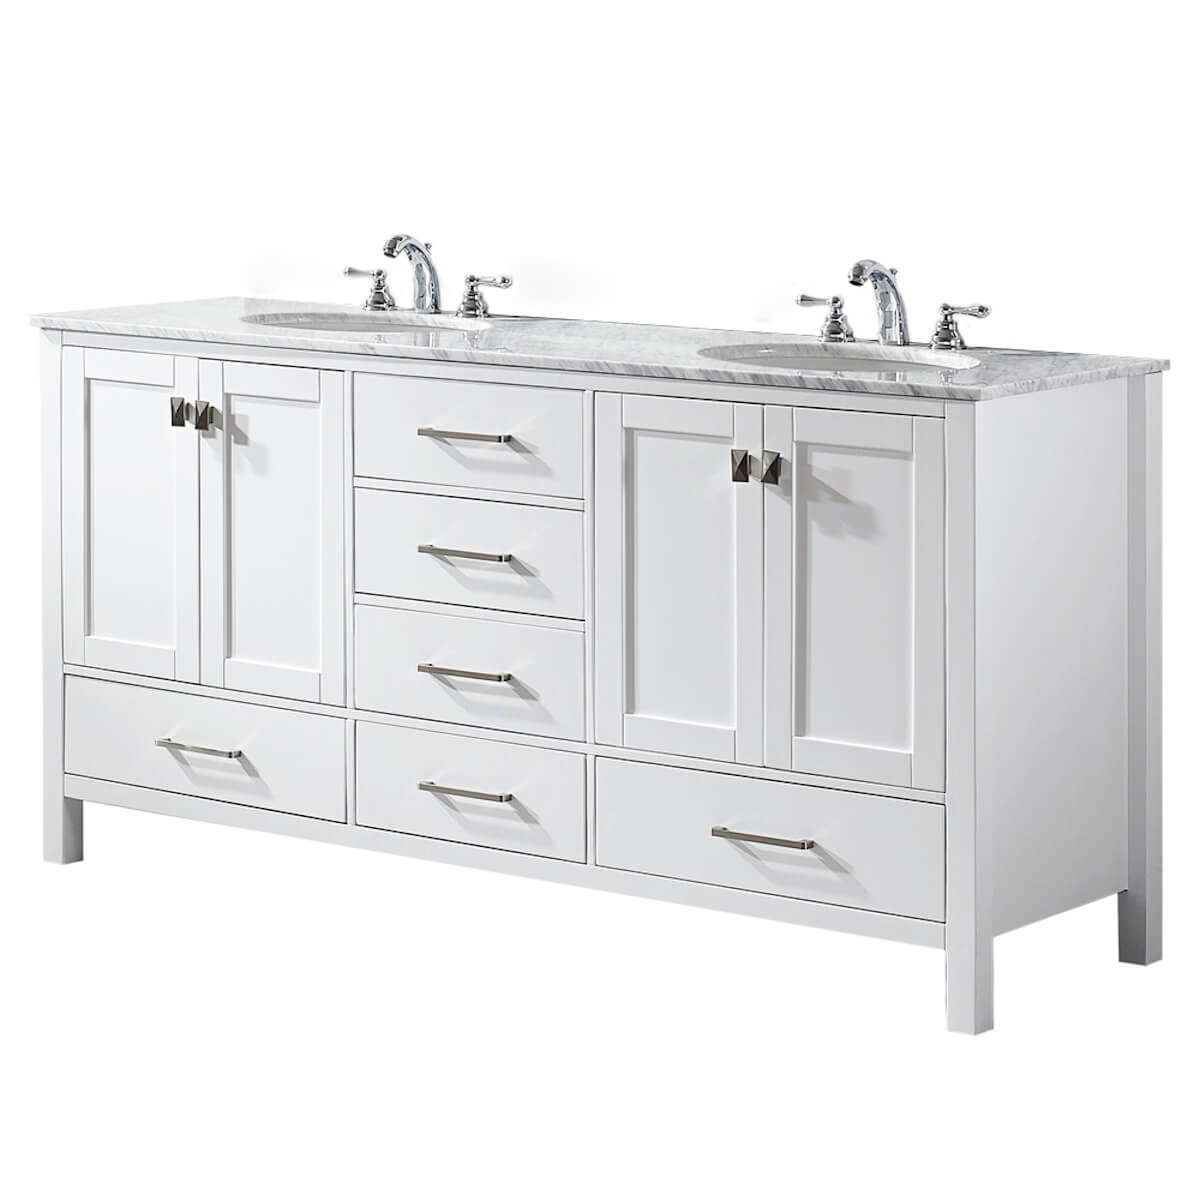 Vinnova Gela 72" White Double Vanity with Carrara White Marble Countertop Without Mirror Right Side 723072-WH-CA-NM